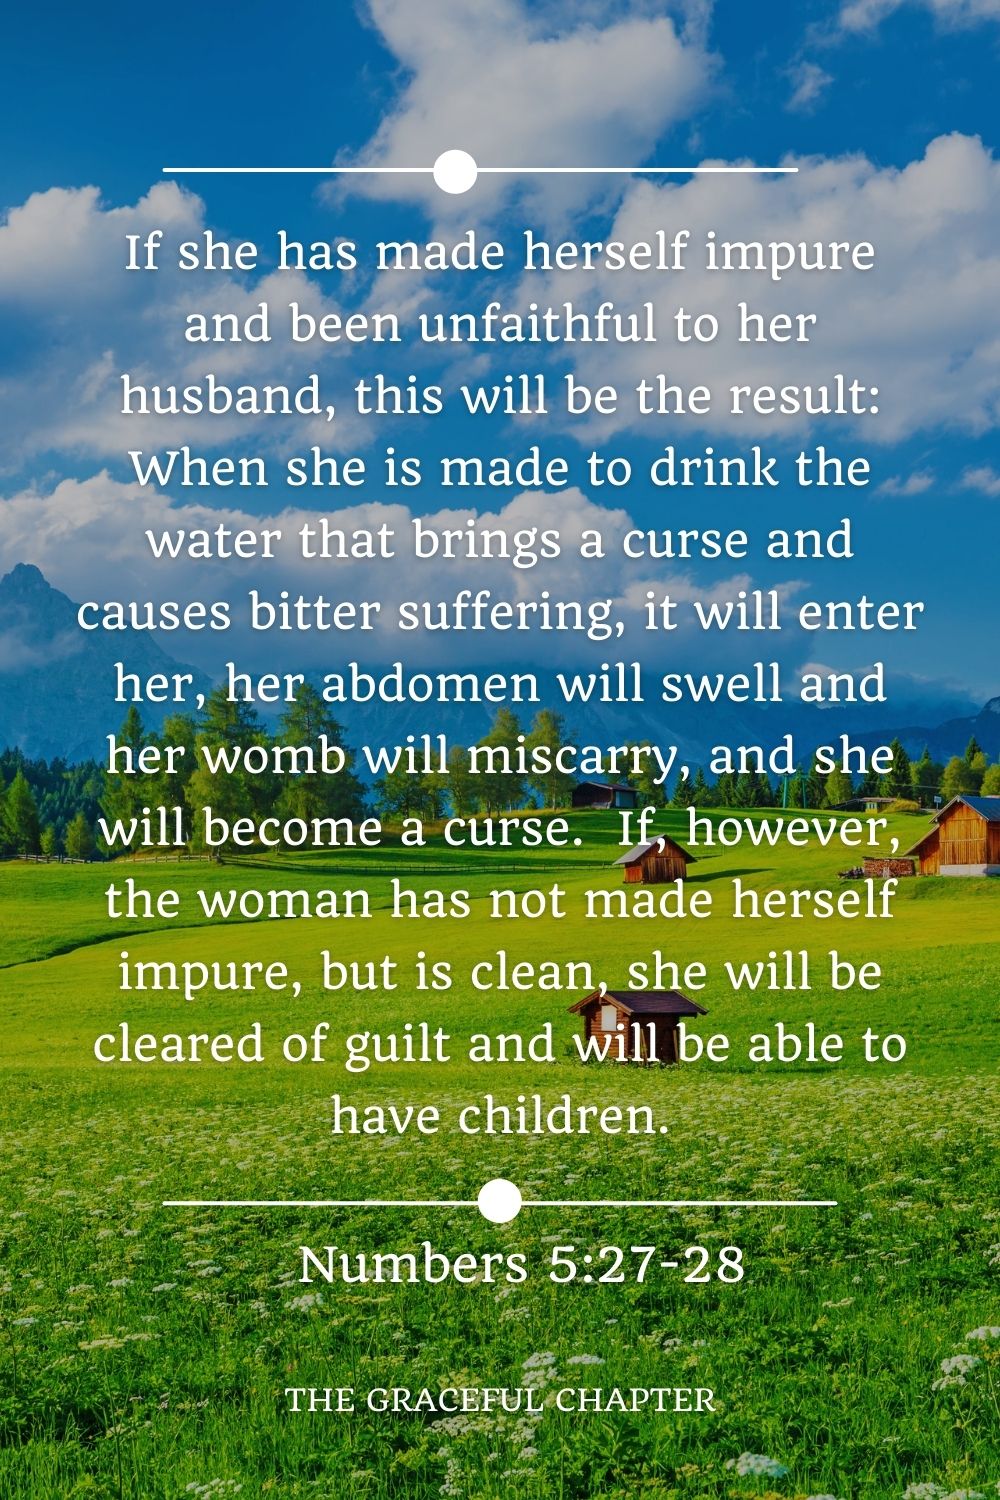 If she has made herself impure and been unfaithful to her husband, this will be the result: When she is made to drink the water that brings a curse and causes bitter suffering, it will enter her, her abdomen will swell and her womb will miscarry, and she will become a curse.  If, however, the woman has not made herself impure, but is clean, she will be cleared of guilt and will be able to have children. Numbers 5:27-28